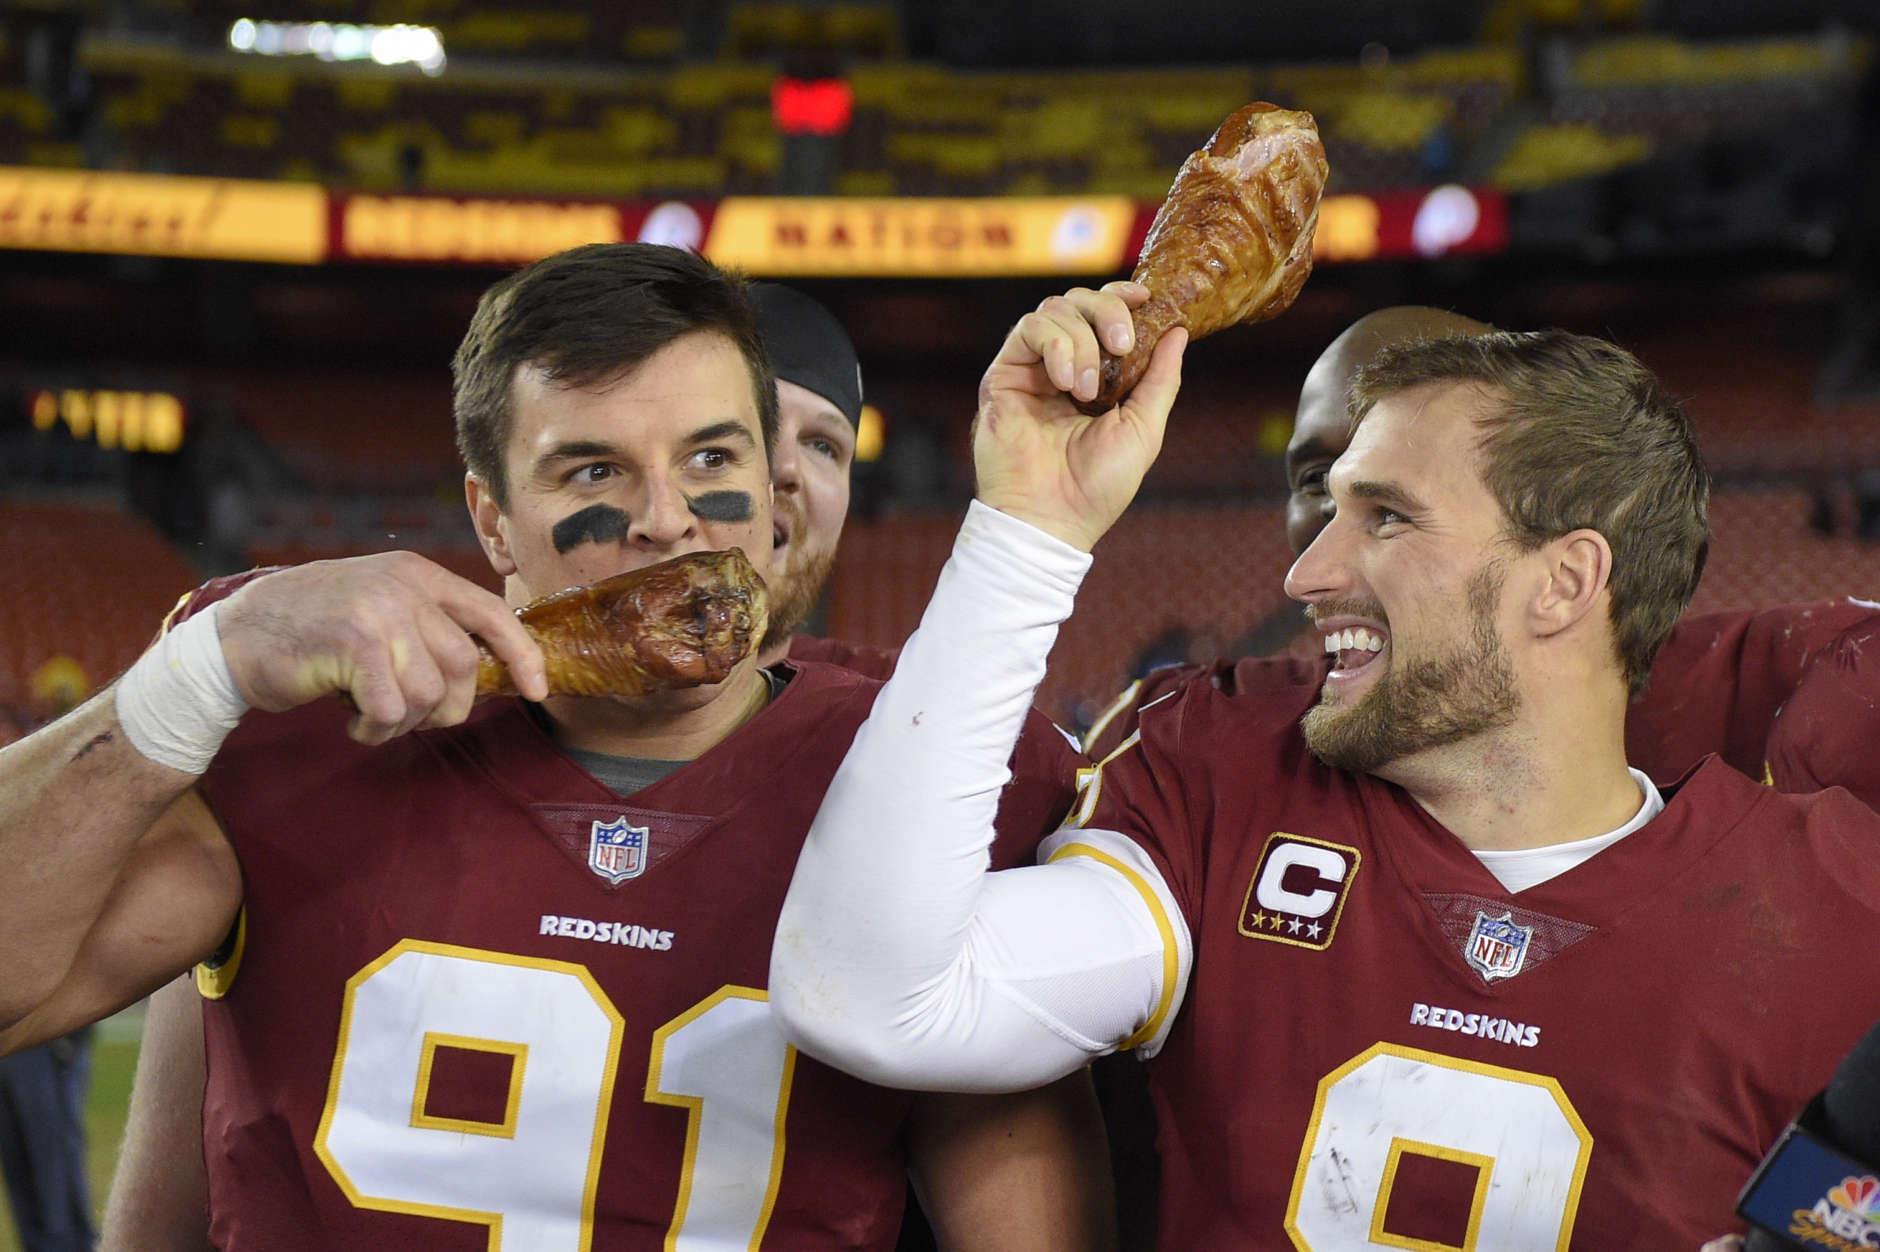 Washington Redskins quarterback Kirk Cousins (8) holds up a turkey leg as outside linebacker Ryan Kerrigan (91) eats his after an NFL football game against the New York Giants in Landover, Md., Friday, Nov. 24, 2017. The Redskins defeated the Giants 20-10. (AP Photo/Nick Wass)